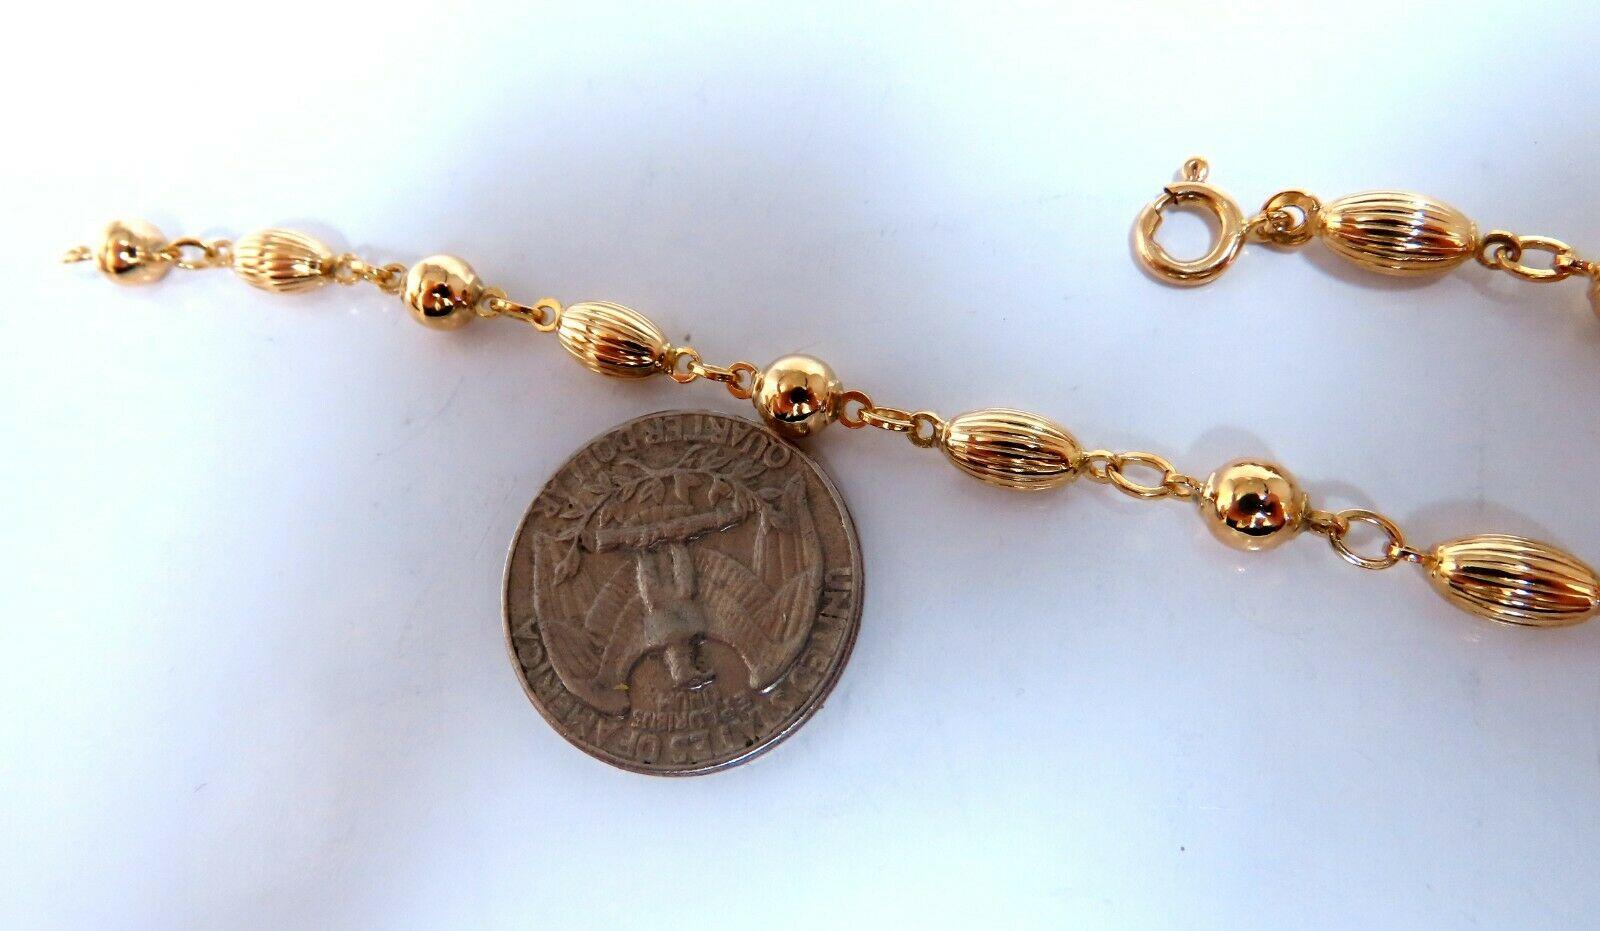 Melon & Ball Bead Chain Link 

Bracelet

Durable, Well Made

14kt. yellow gold

6.3 Grams.

5mm wide

7 inch long

wide caliber clasp.